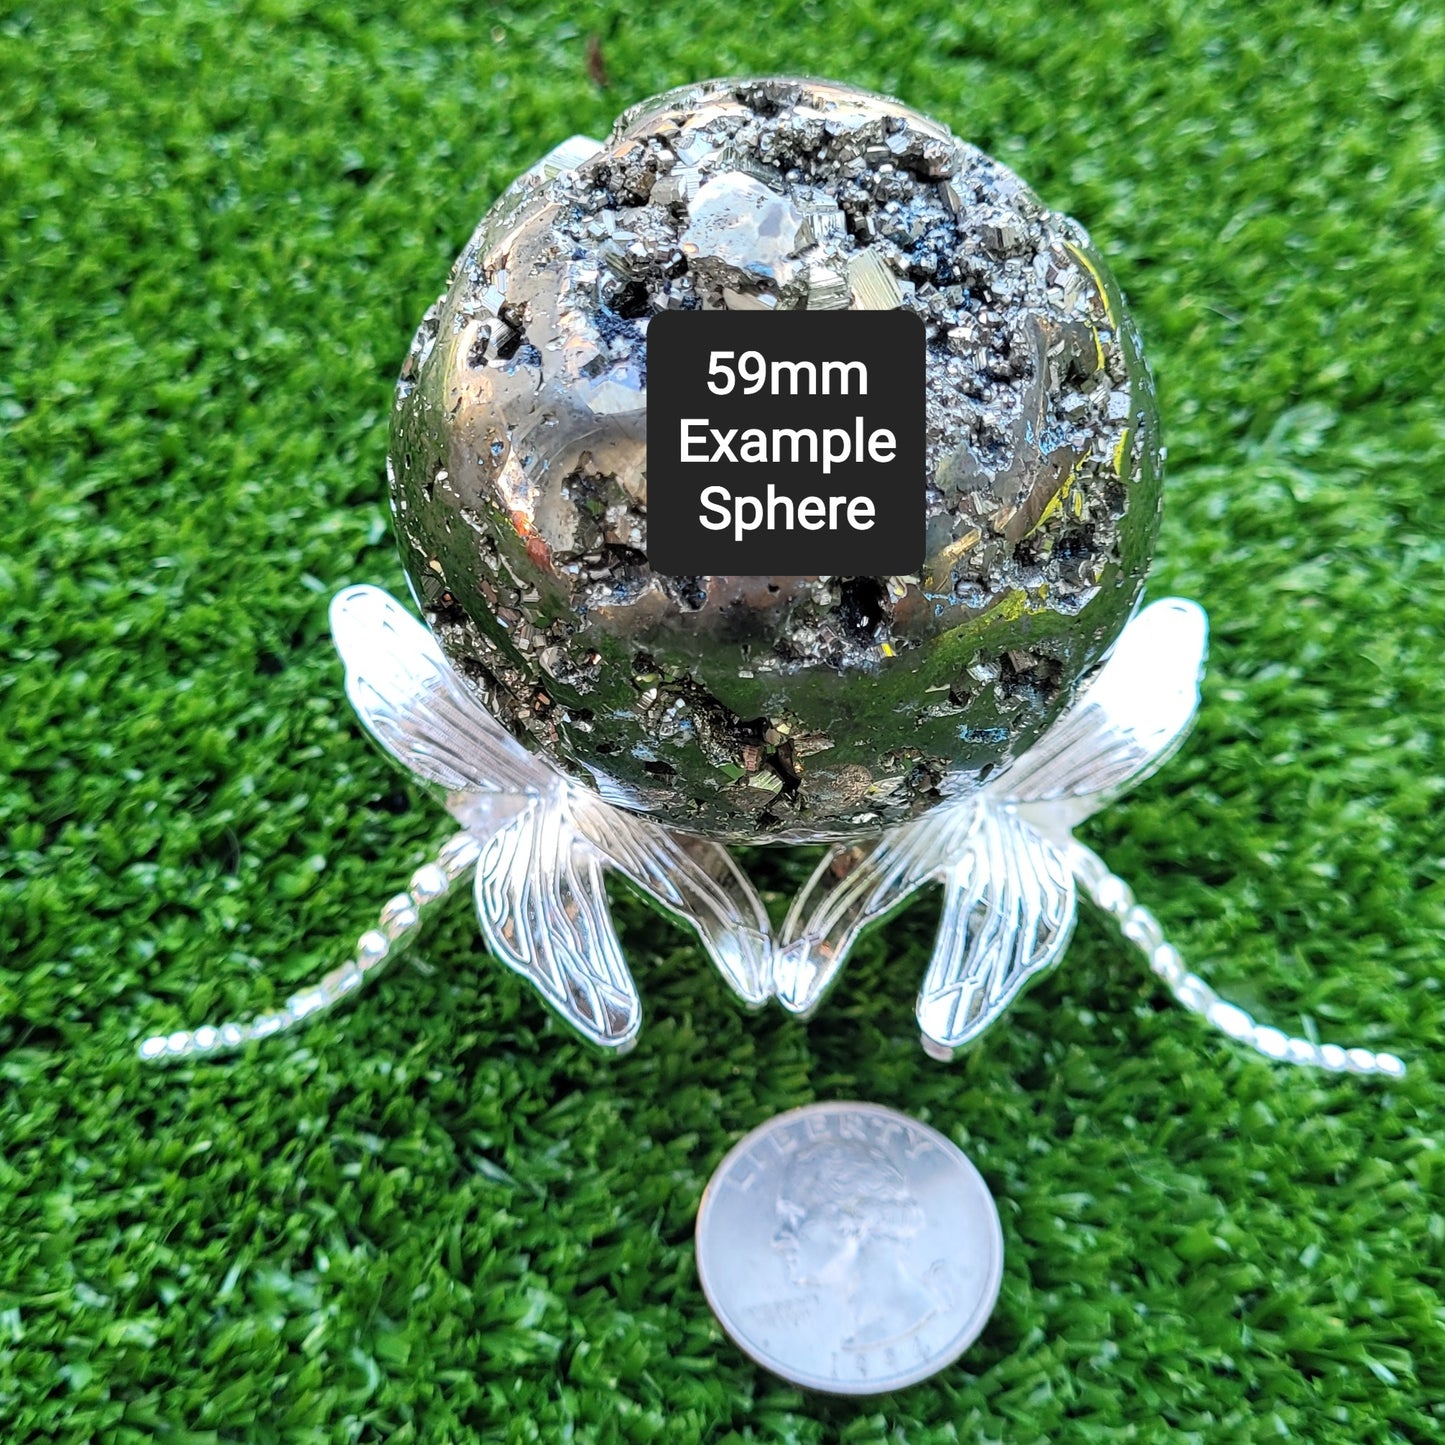 Dragonfly Sphere Holder Stand in Silver, for Crystal Balls 1.1" to 3" (27mm to 77mm)